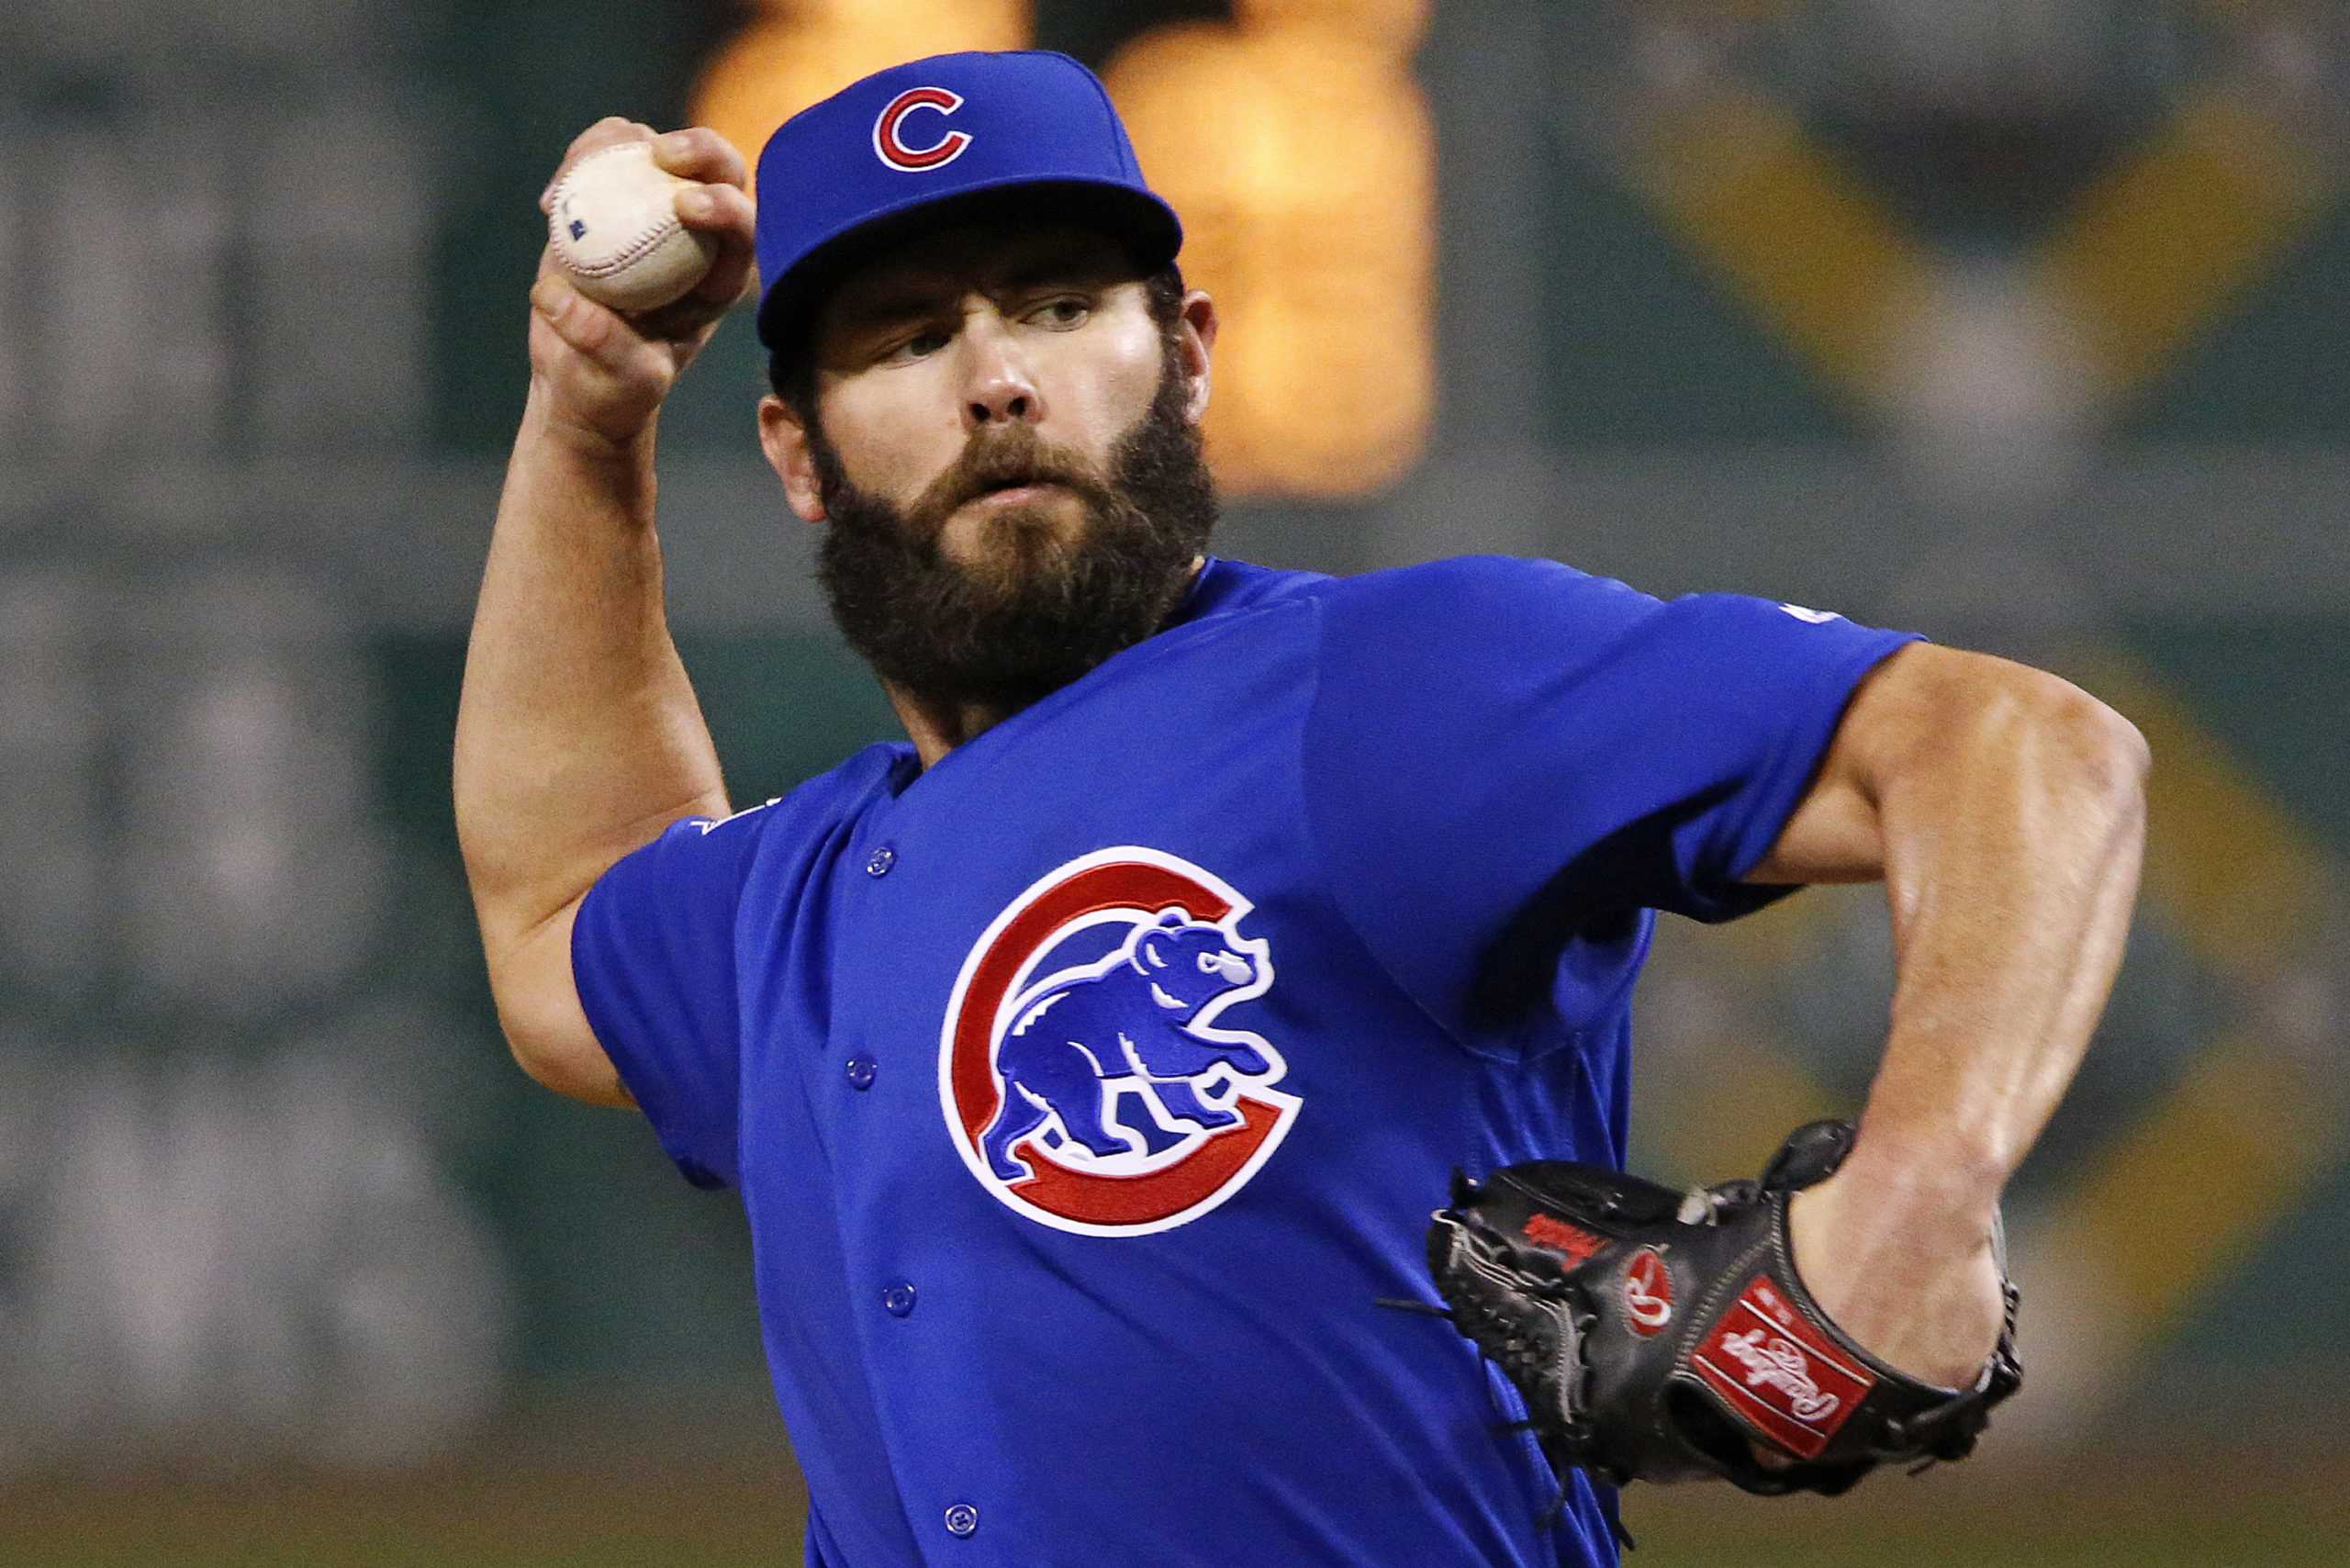 Chicago Cubs starting pitcher Jake Arrieta delivers in the second inning of a baseball game against the Pittsburgh Pirates in Pittsburgh, Wednesday, Sept. 28, 2016. (AP Photo/Gene J. Puskar)